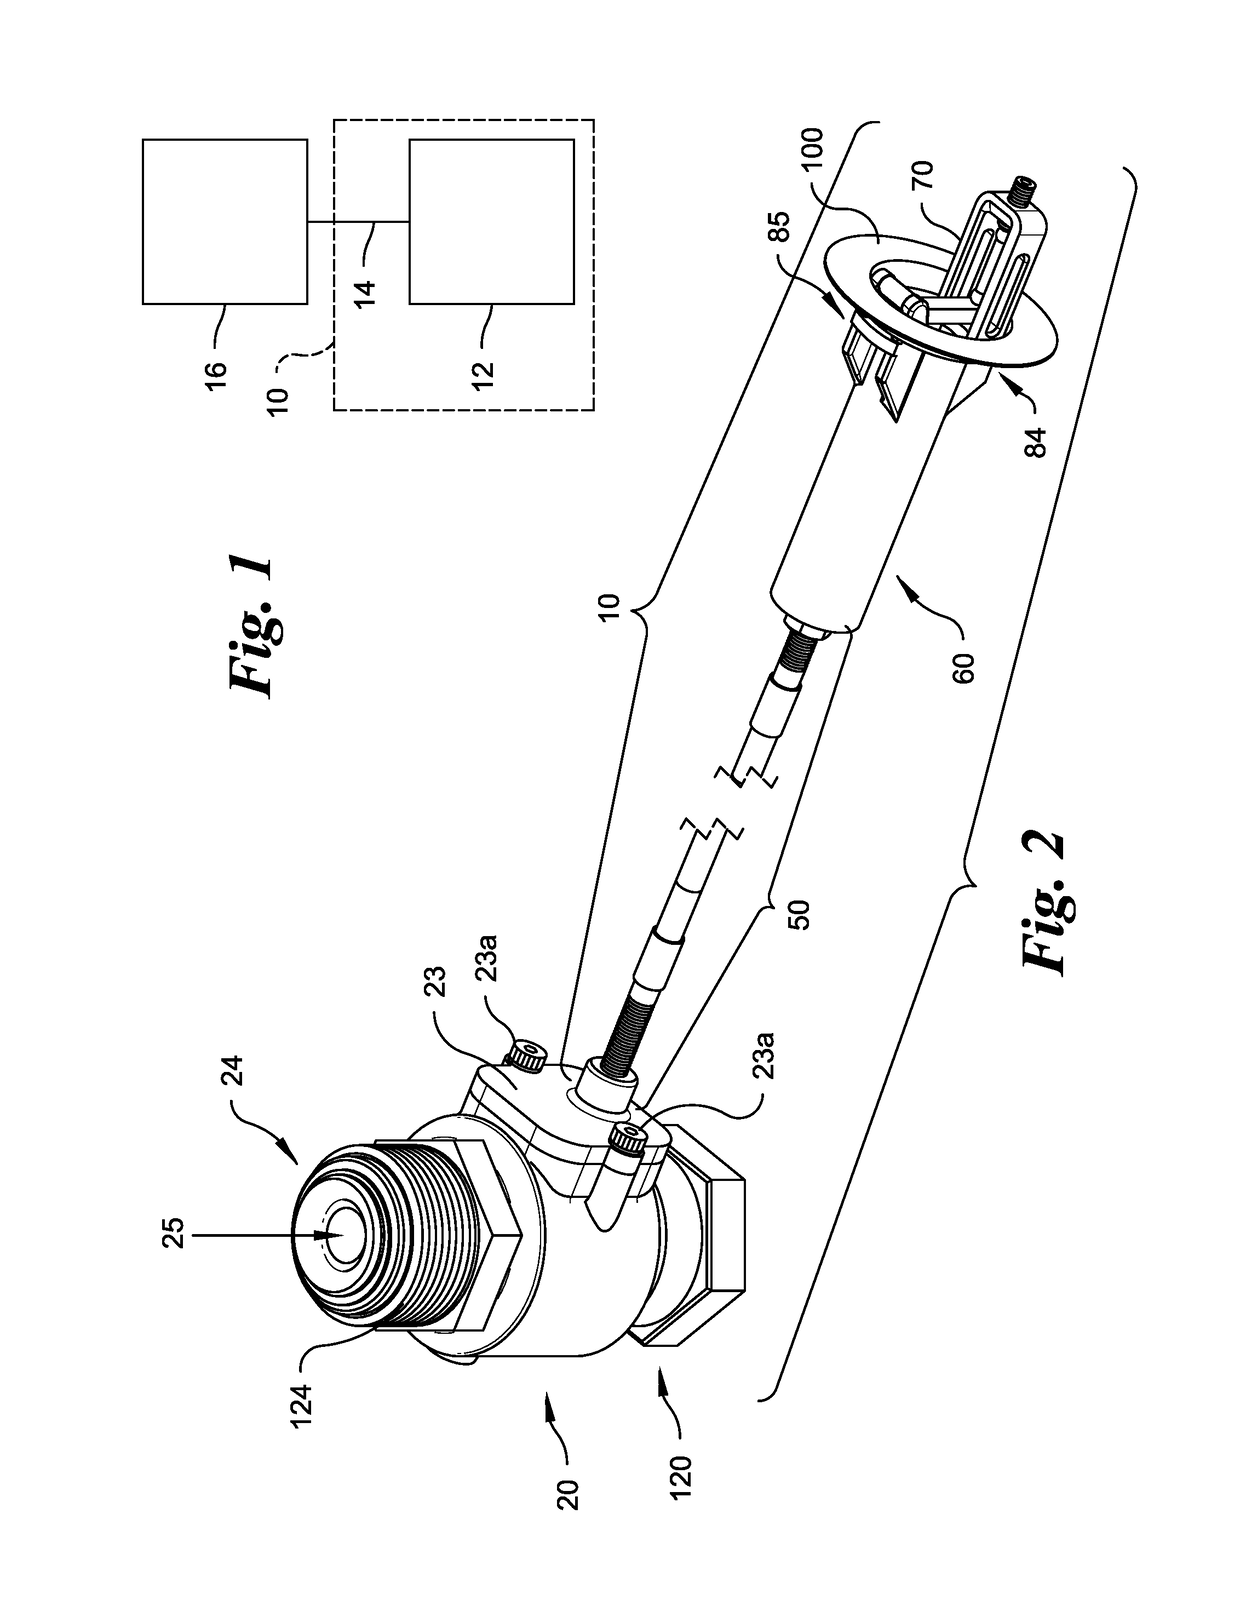 Preaction sprinkler valve assemblies, related dry sprinkler devices adapted for long travel, and fire protection sprinkler systems